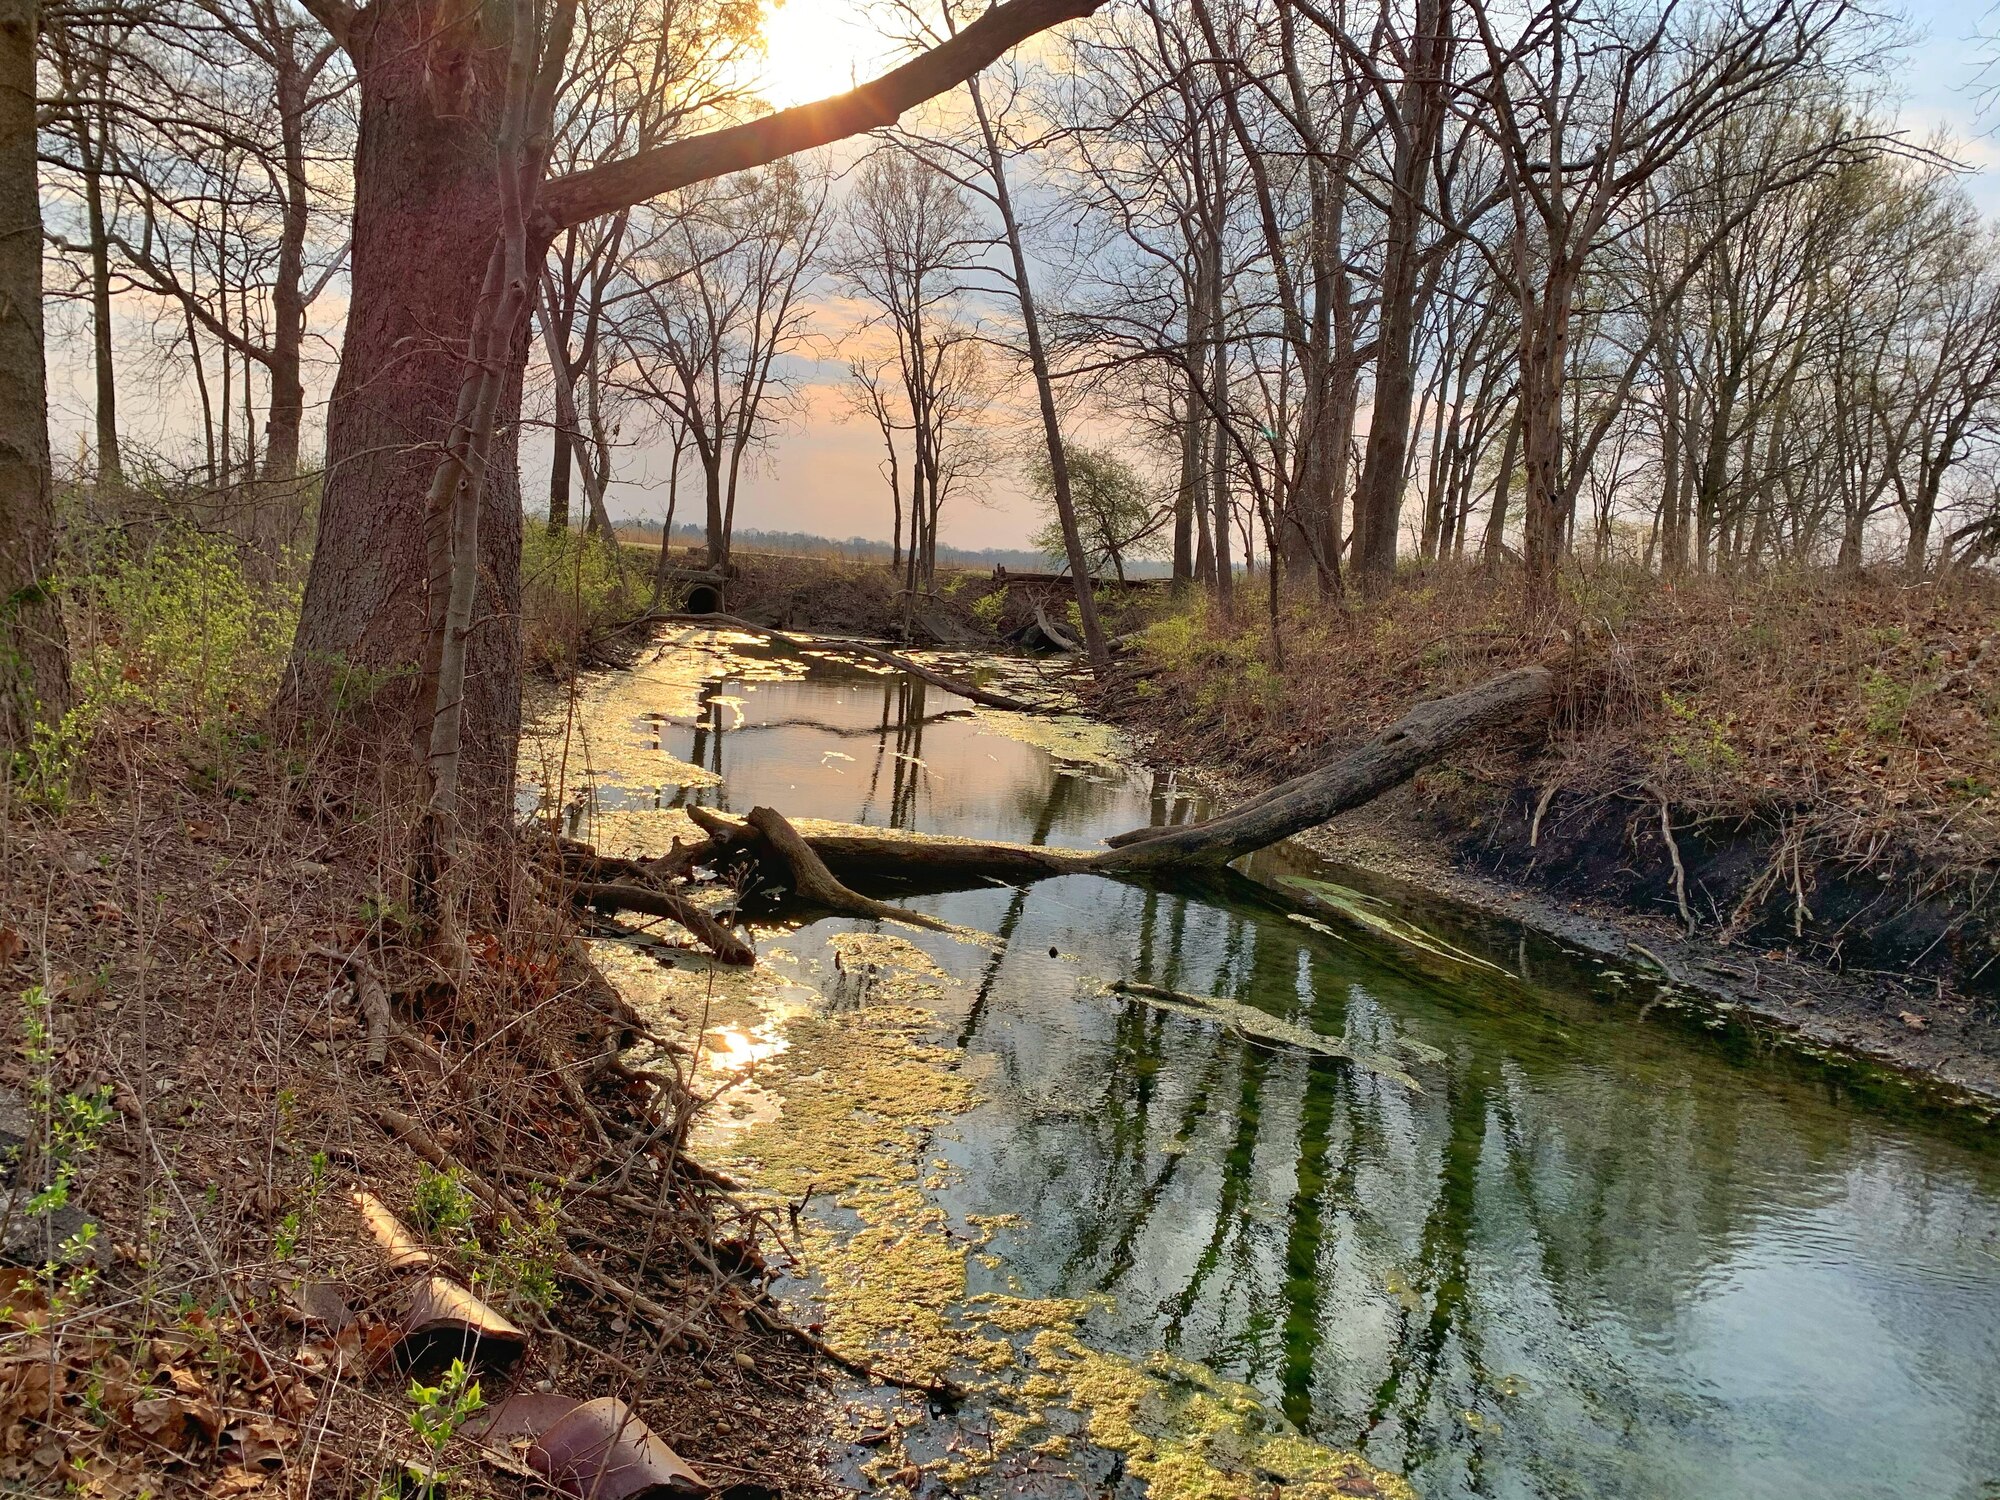 Evening sunlight falls on Trout Creek at Wright-Patterson Air Force Base on April 8. The 88th Civil Engineer Group’s Environmental Management Branch planted native seedlings around the creek for Earth Day in efforts to foster pollinators. (Photo by Danielle Trevino)